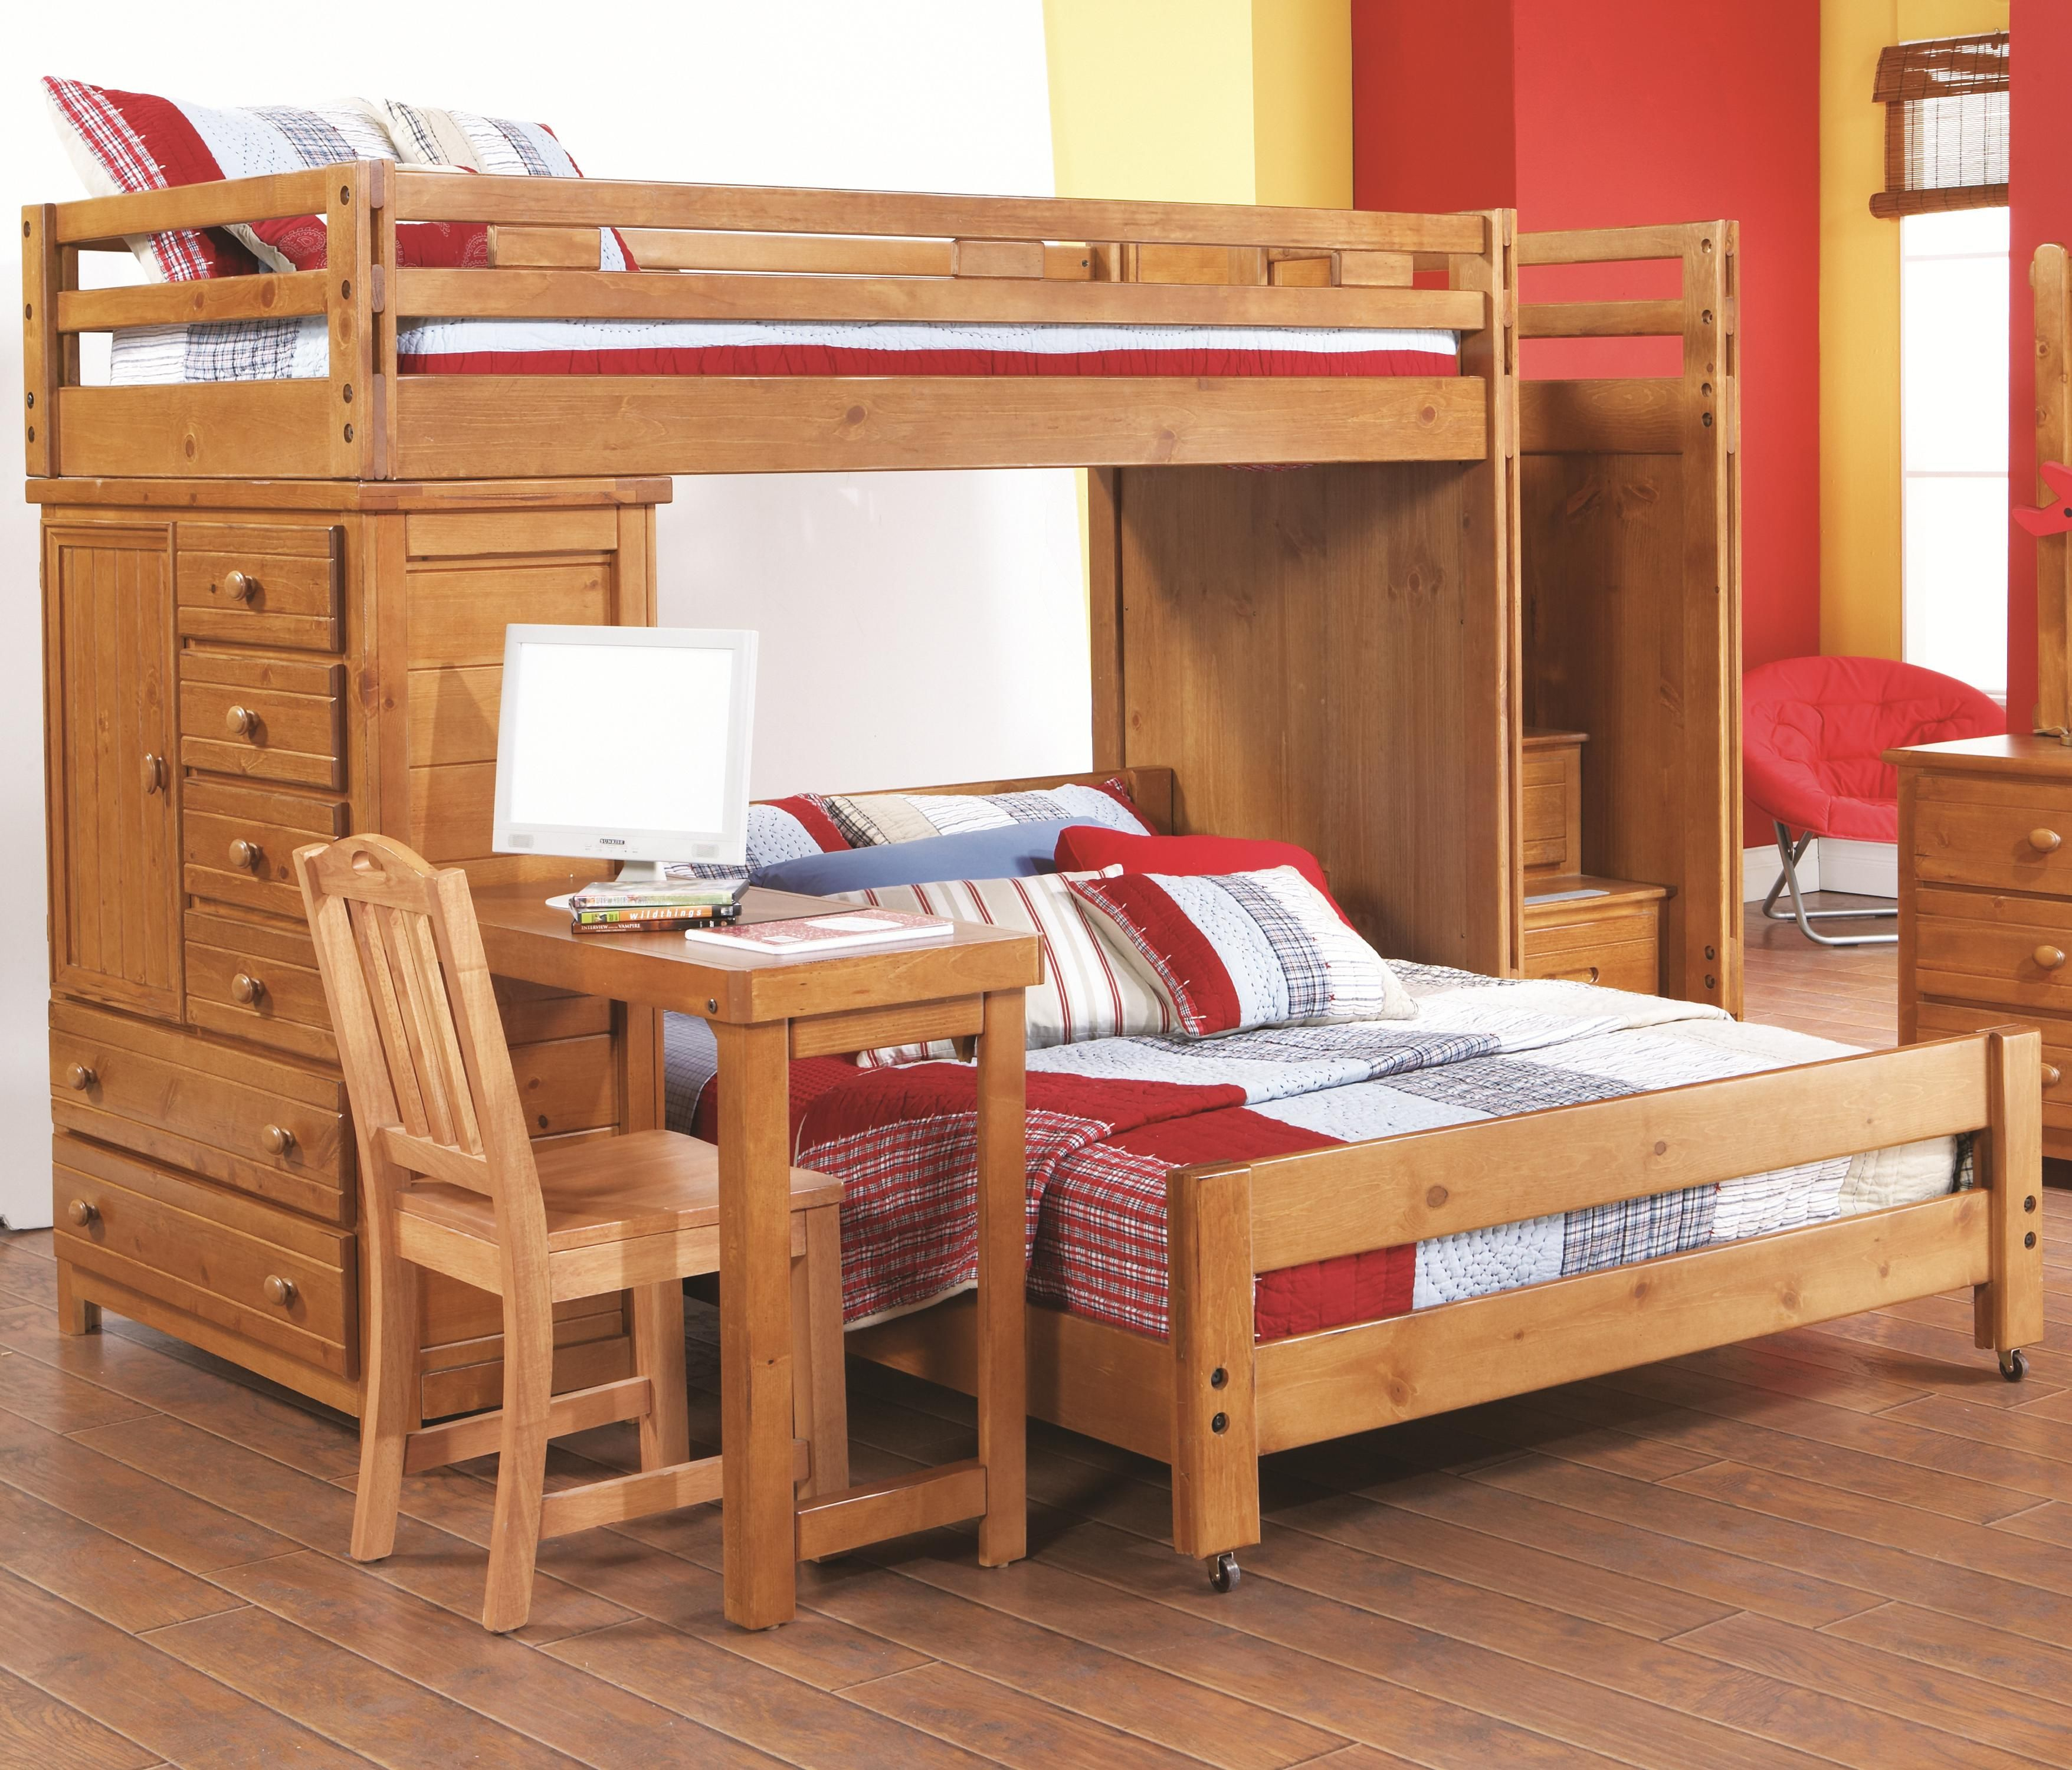 Creekside Twin/Full Loft Bed W/ Attached Deskcanyon Part inside Canyon Furniture Company Bunk Bed